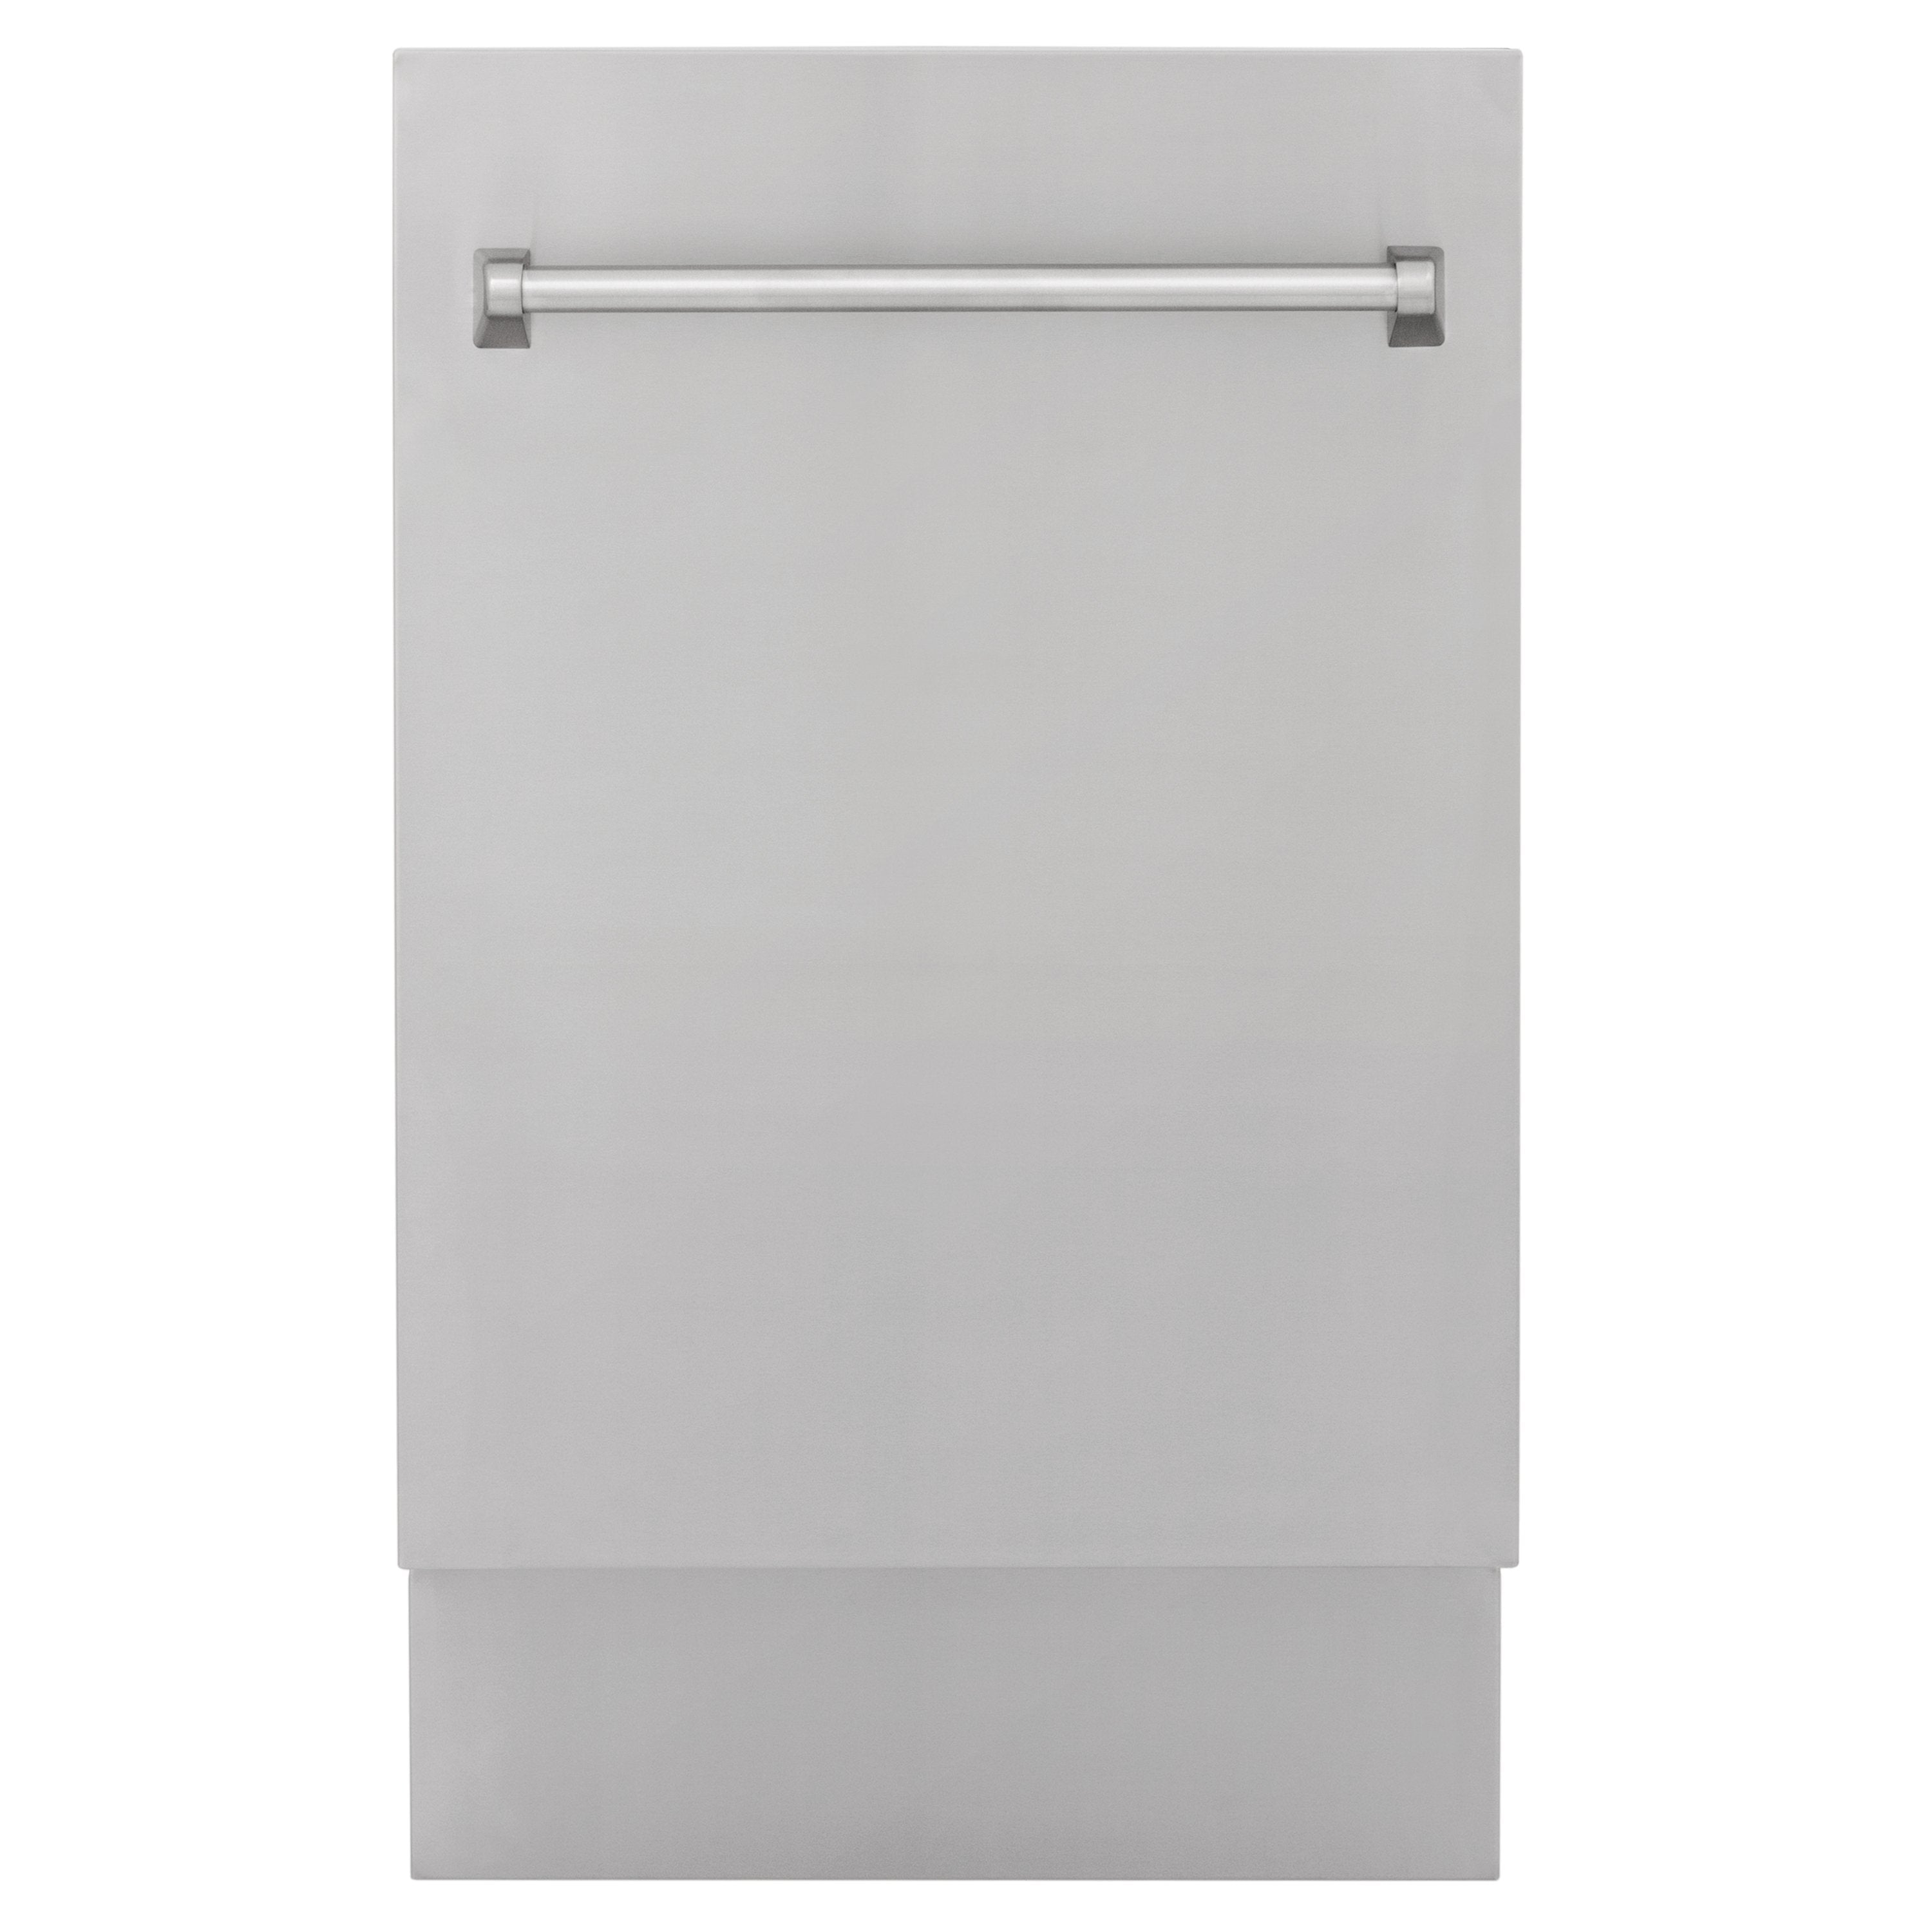 ZLINE 18 in. Top Control Tall Dishwasher in Stainless Steel with 3rd Rack